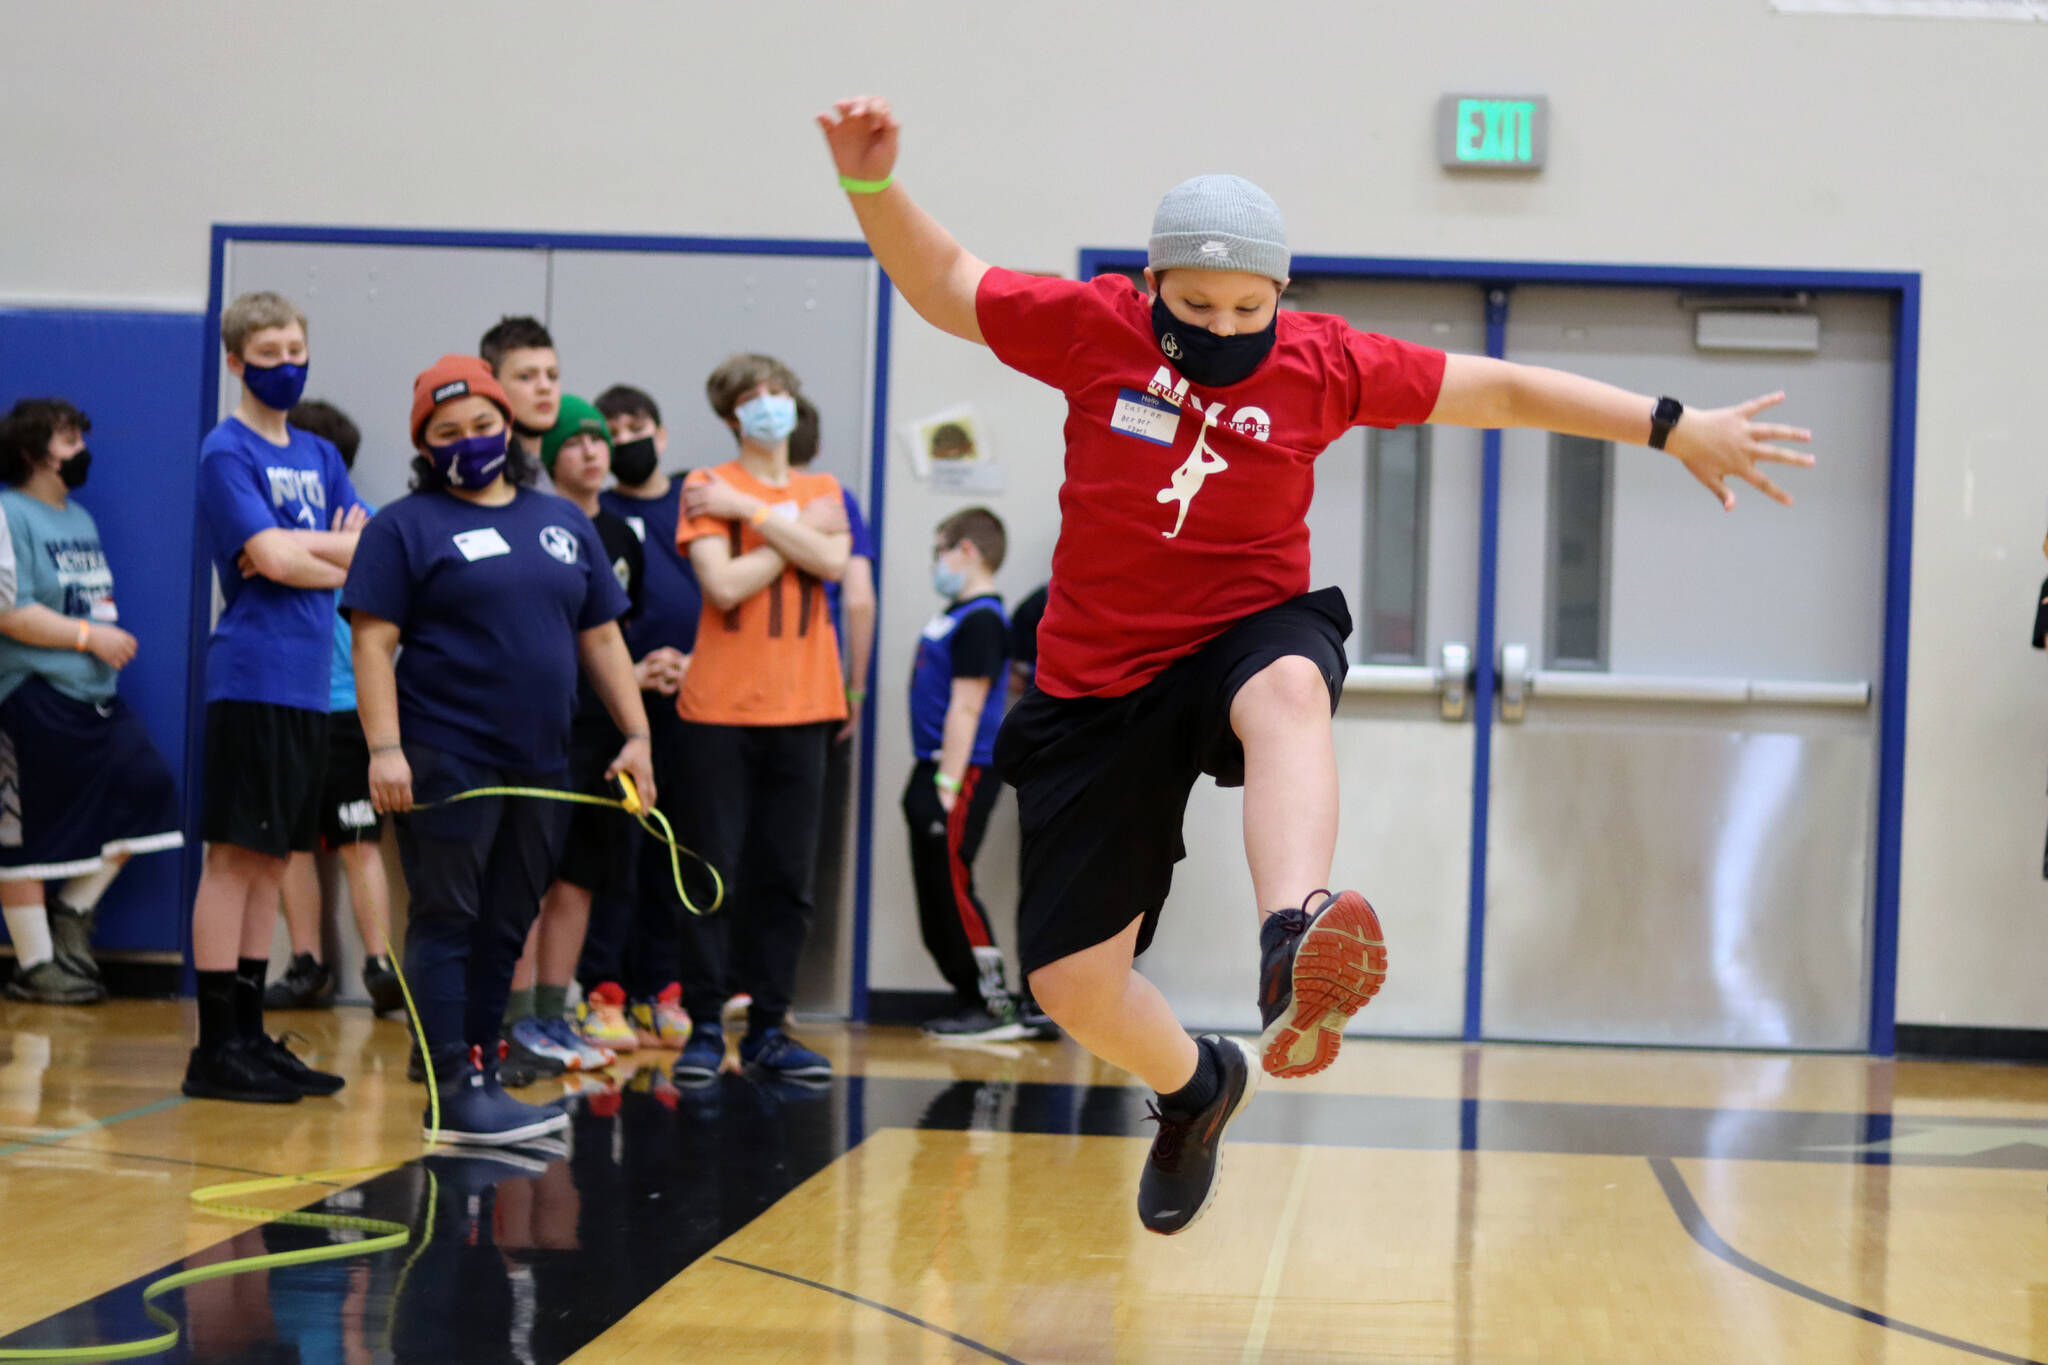 Easton Berger, 13, a Floyd Dryden Middle School student competes in the scissor broad jump Saturday during the 2022 Traditional Games held at Thunder Mountain High School. This year’s games, which feature 10 events, were held in person after multiple pandemic-marred years. Berger said he was happy to see them return to an in-person format. Berger said the Denè stick pull is his favorite event. He placed first in it among middle school boys. (Ben Hohenstatt / Juneau Empire)